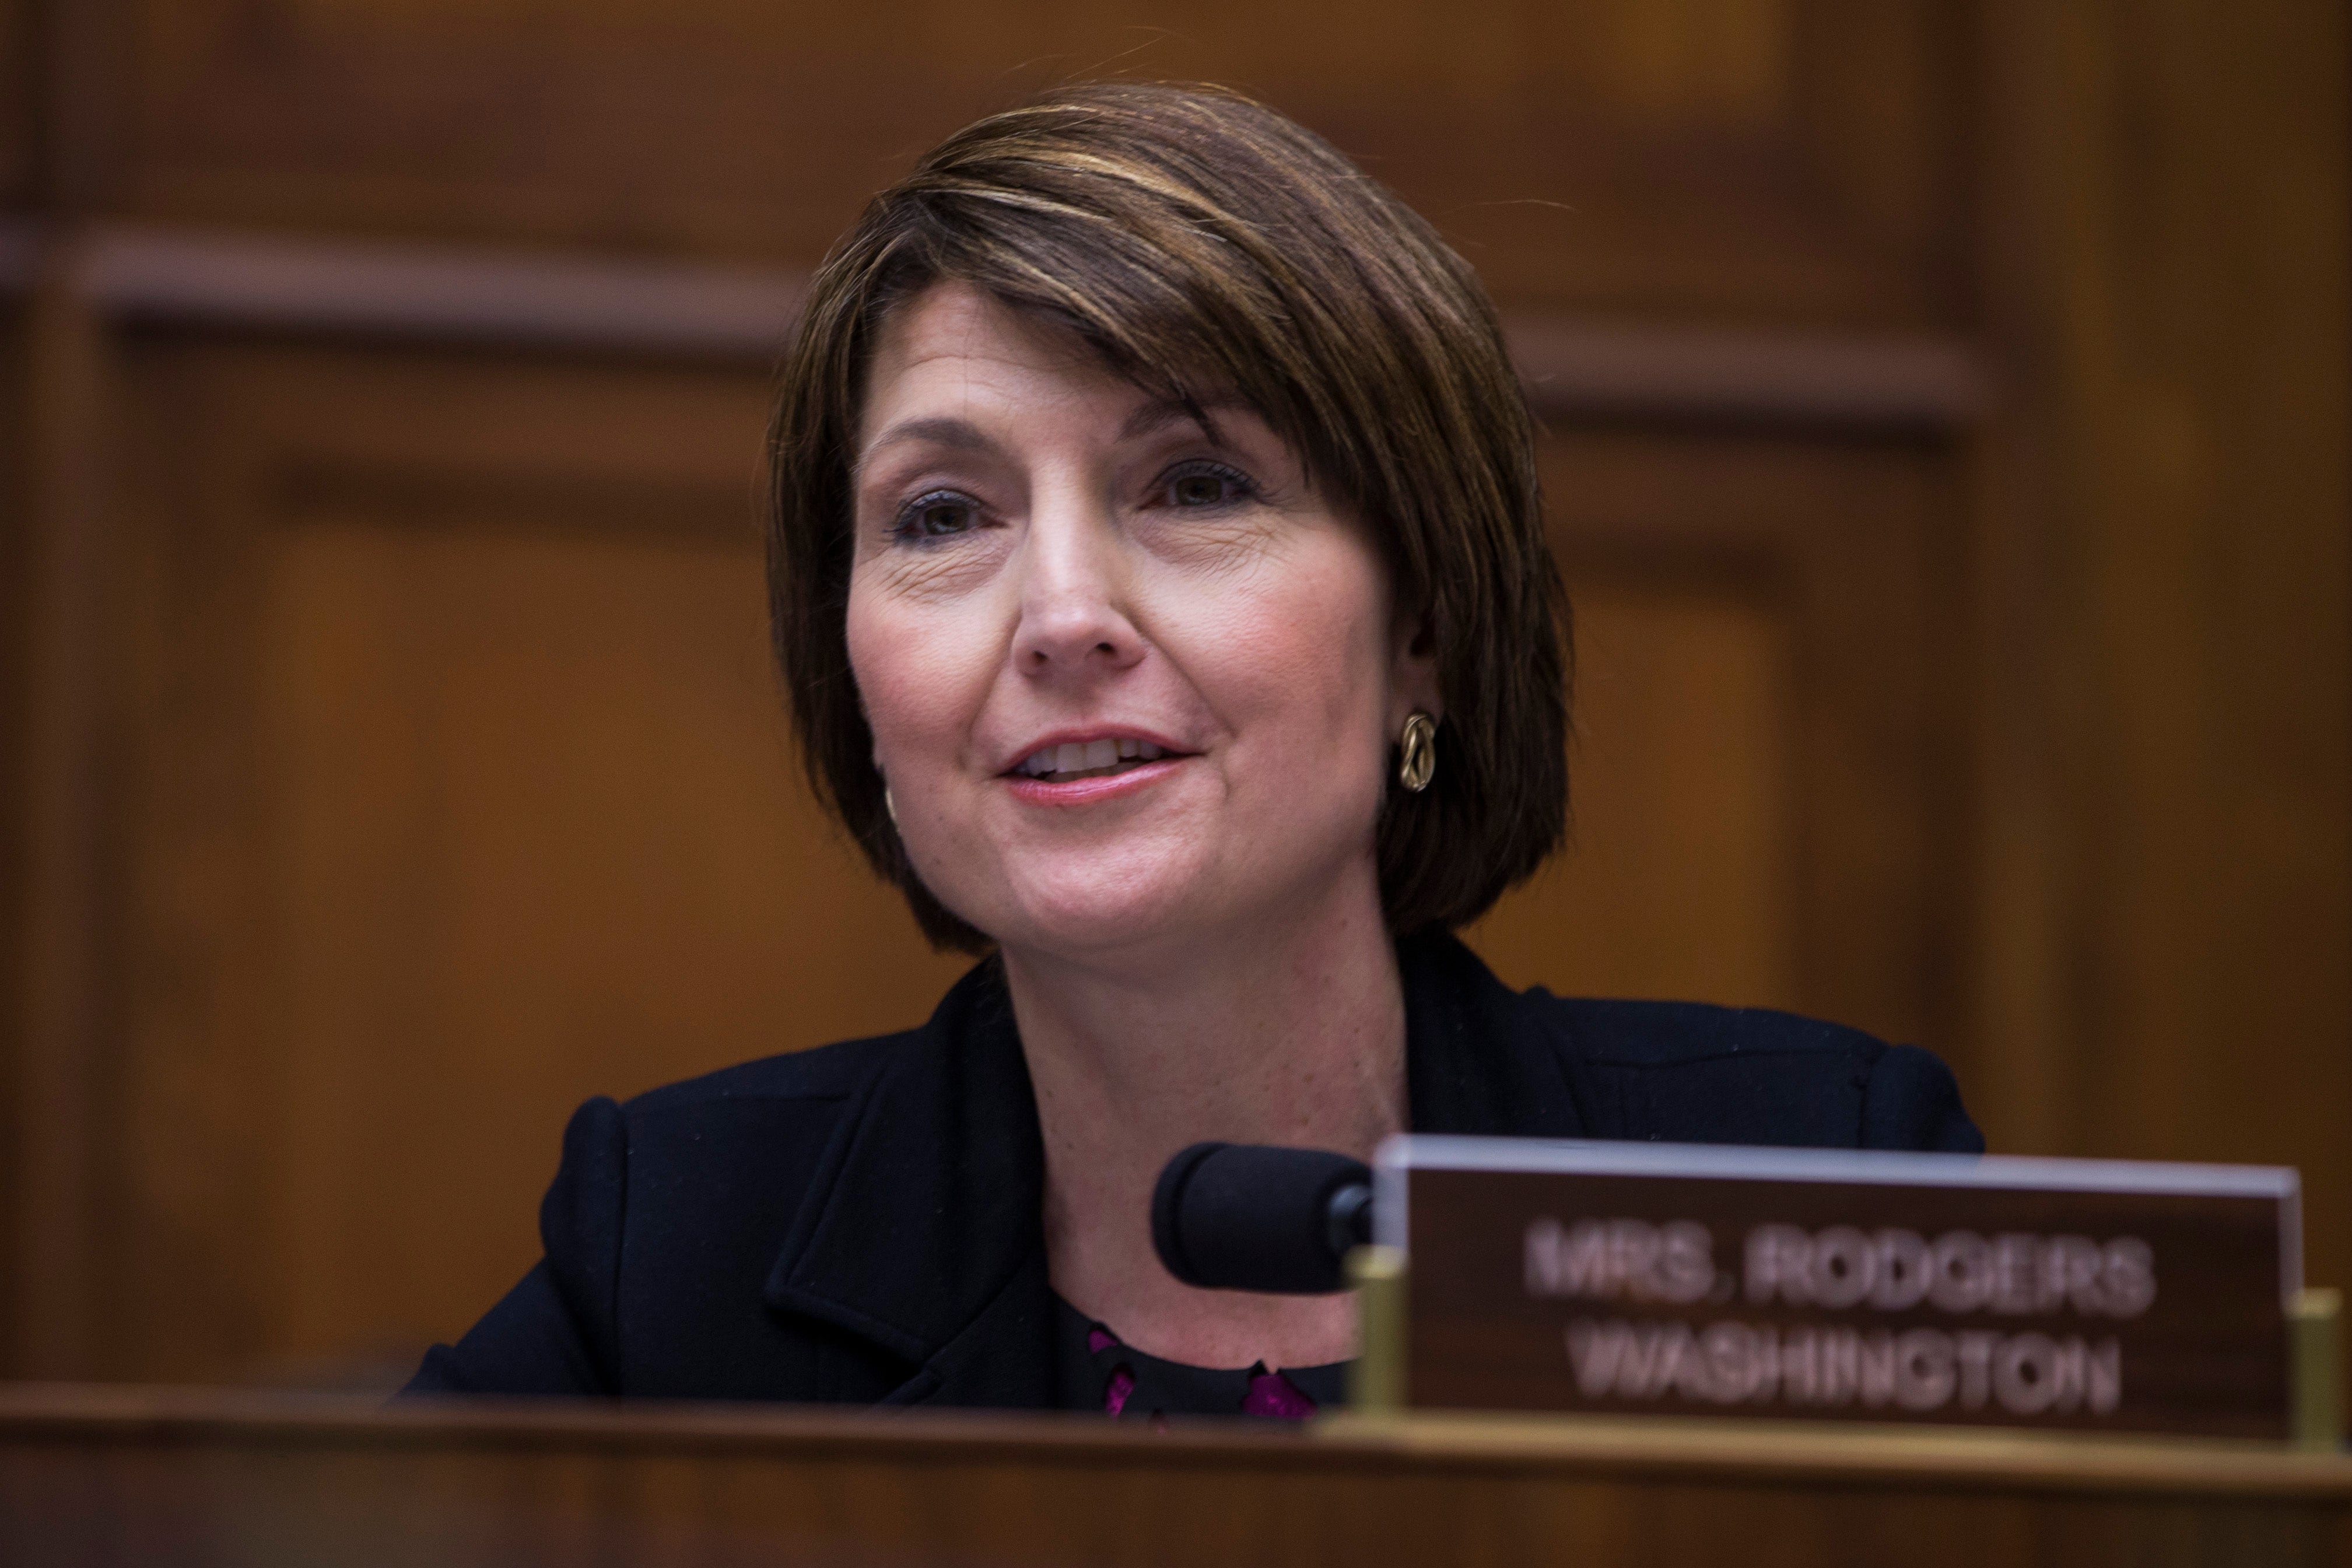 Rep. McMorris Rodgers 'hopeful' modern science will sway public opinion against abortion